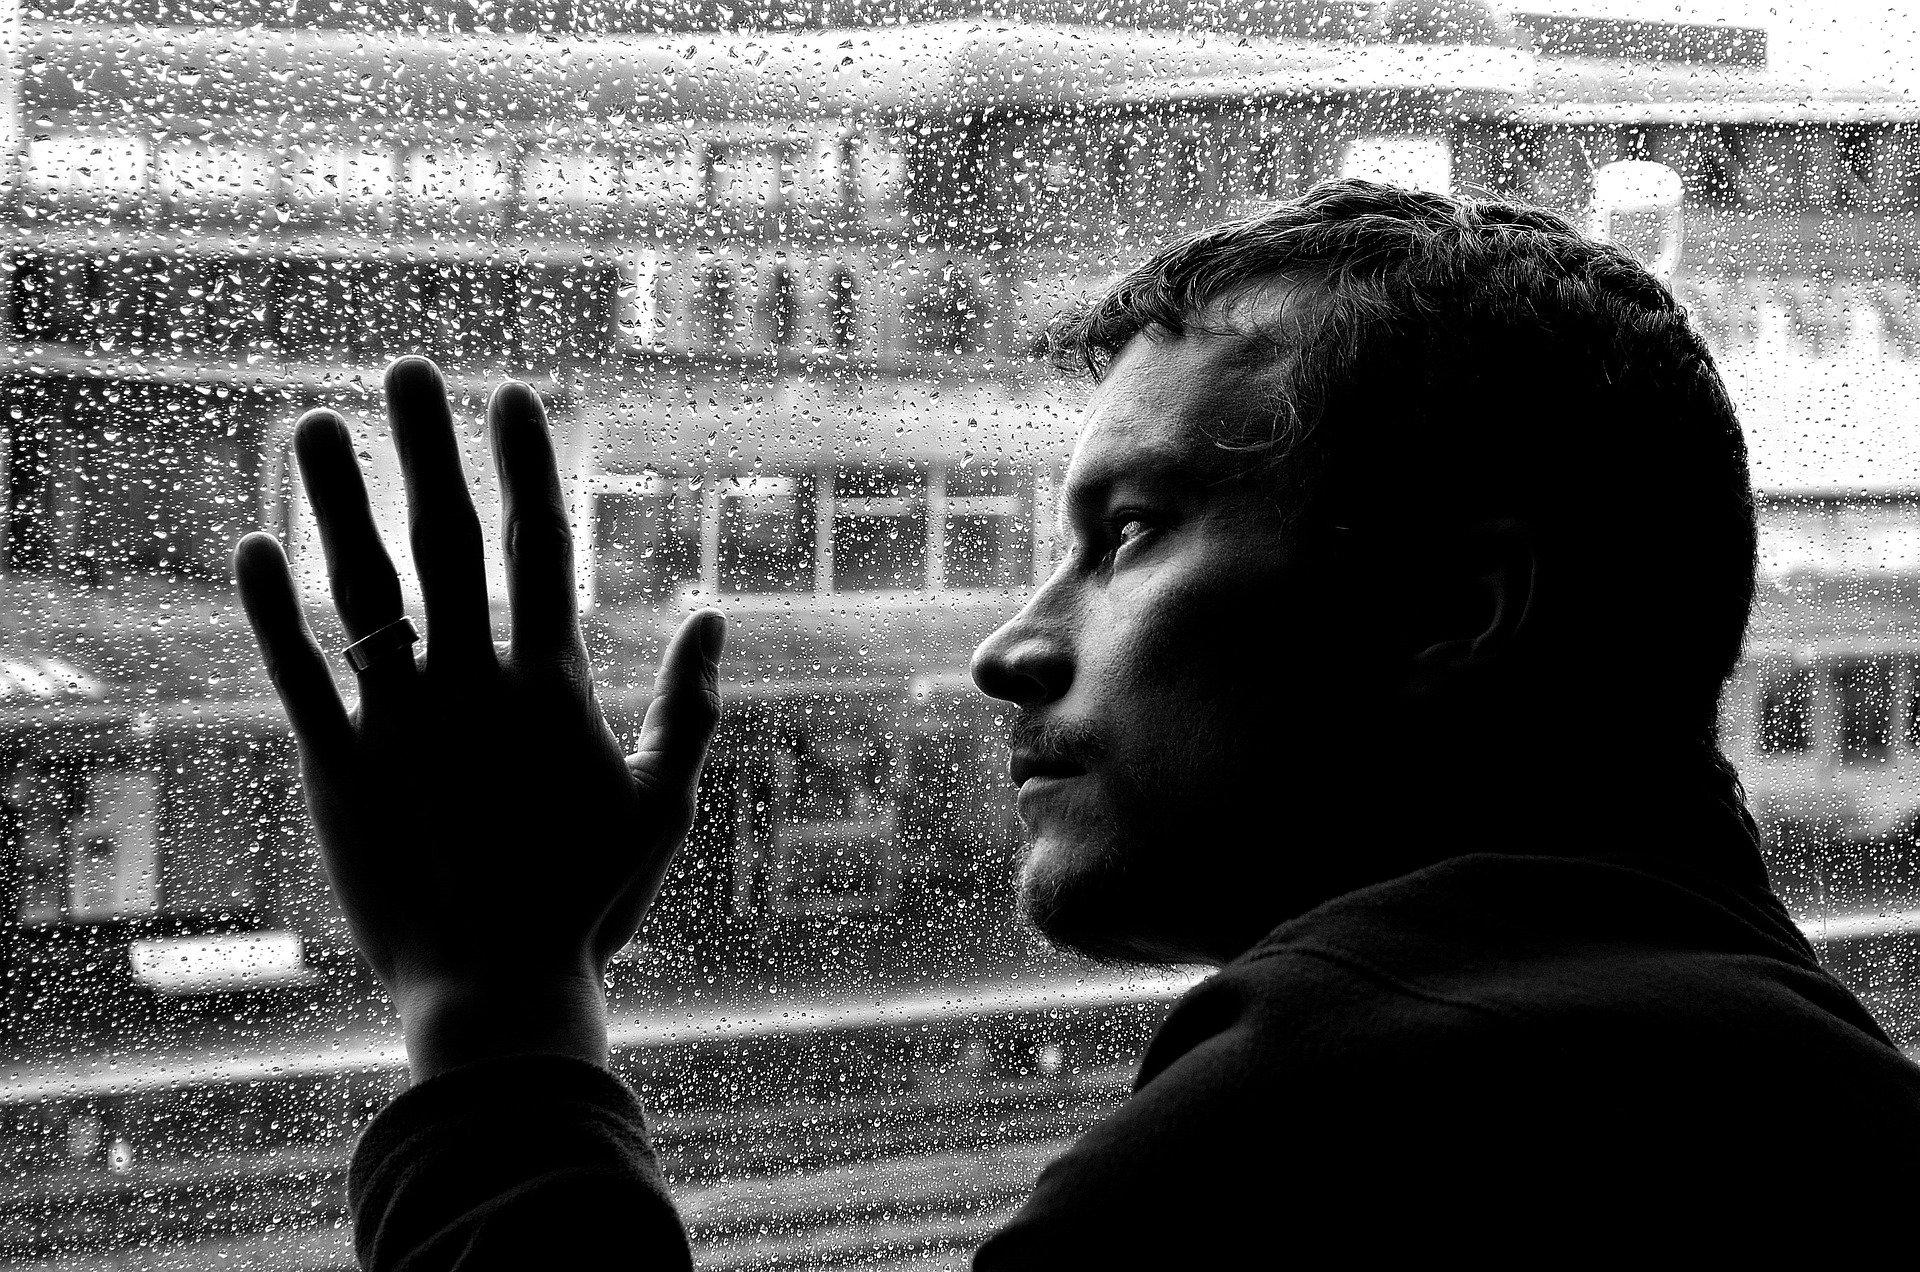 Why am I depressed? A man asks himself this question.